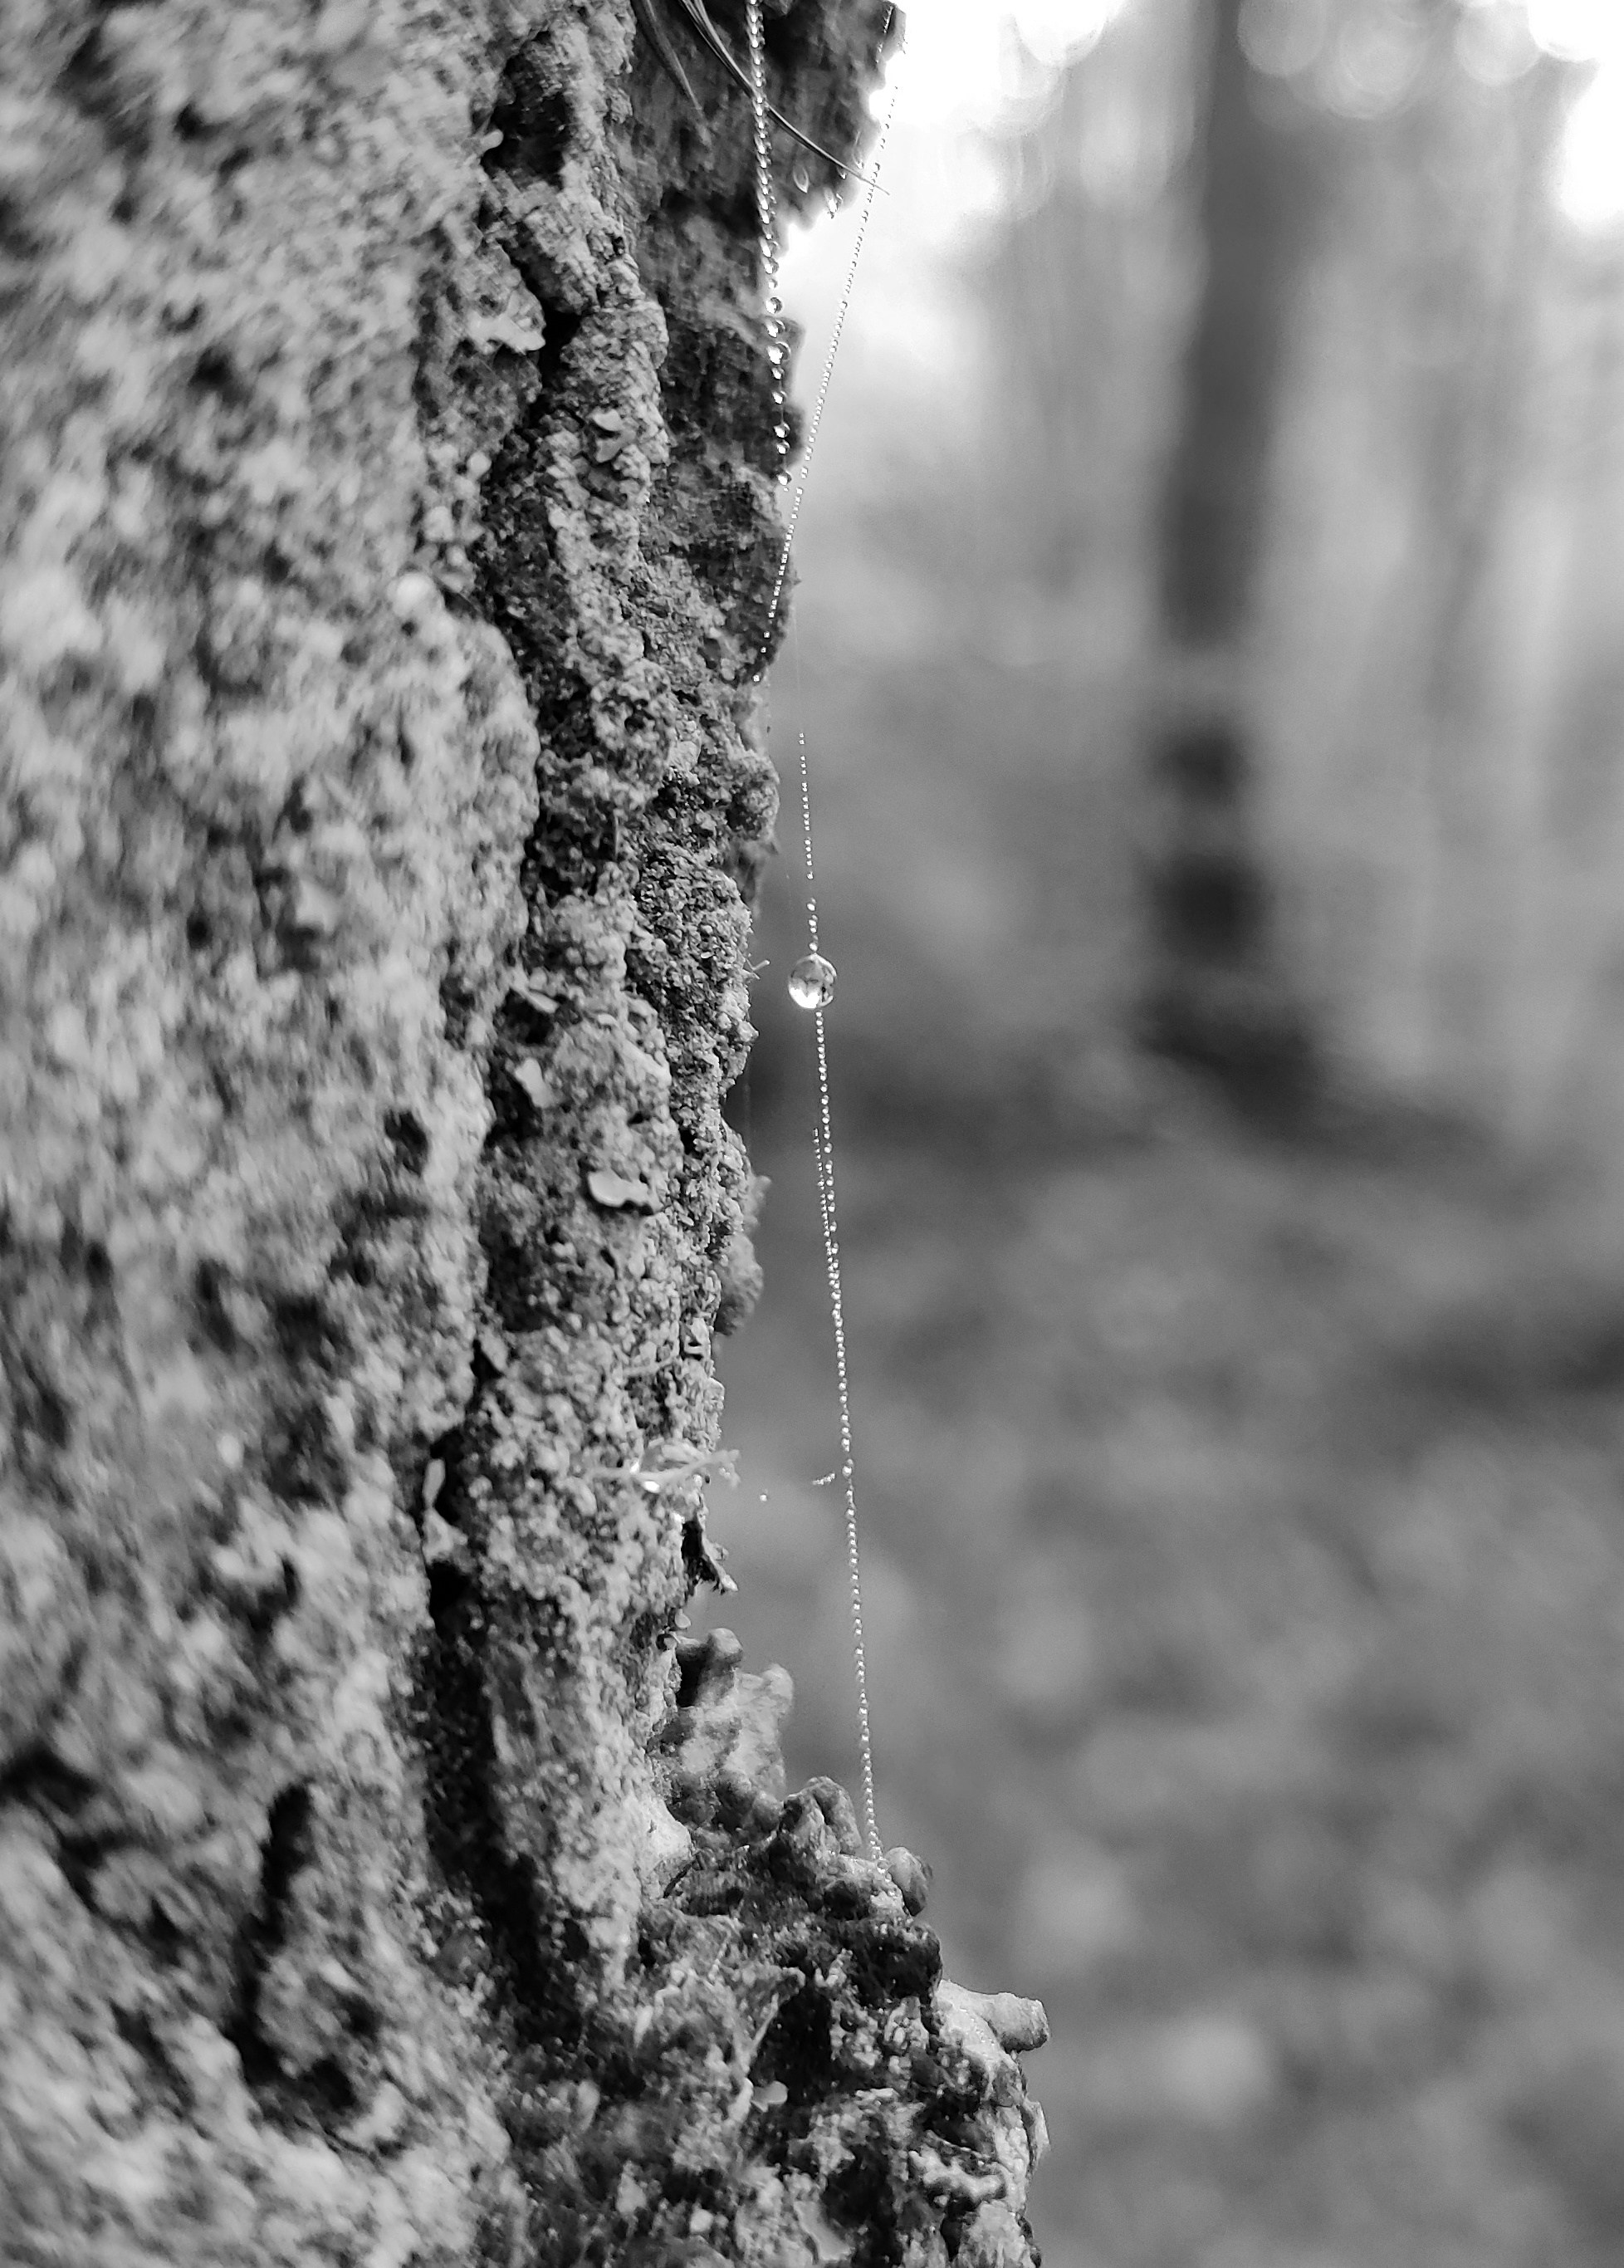 Dew drop on web in a forest